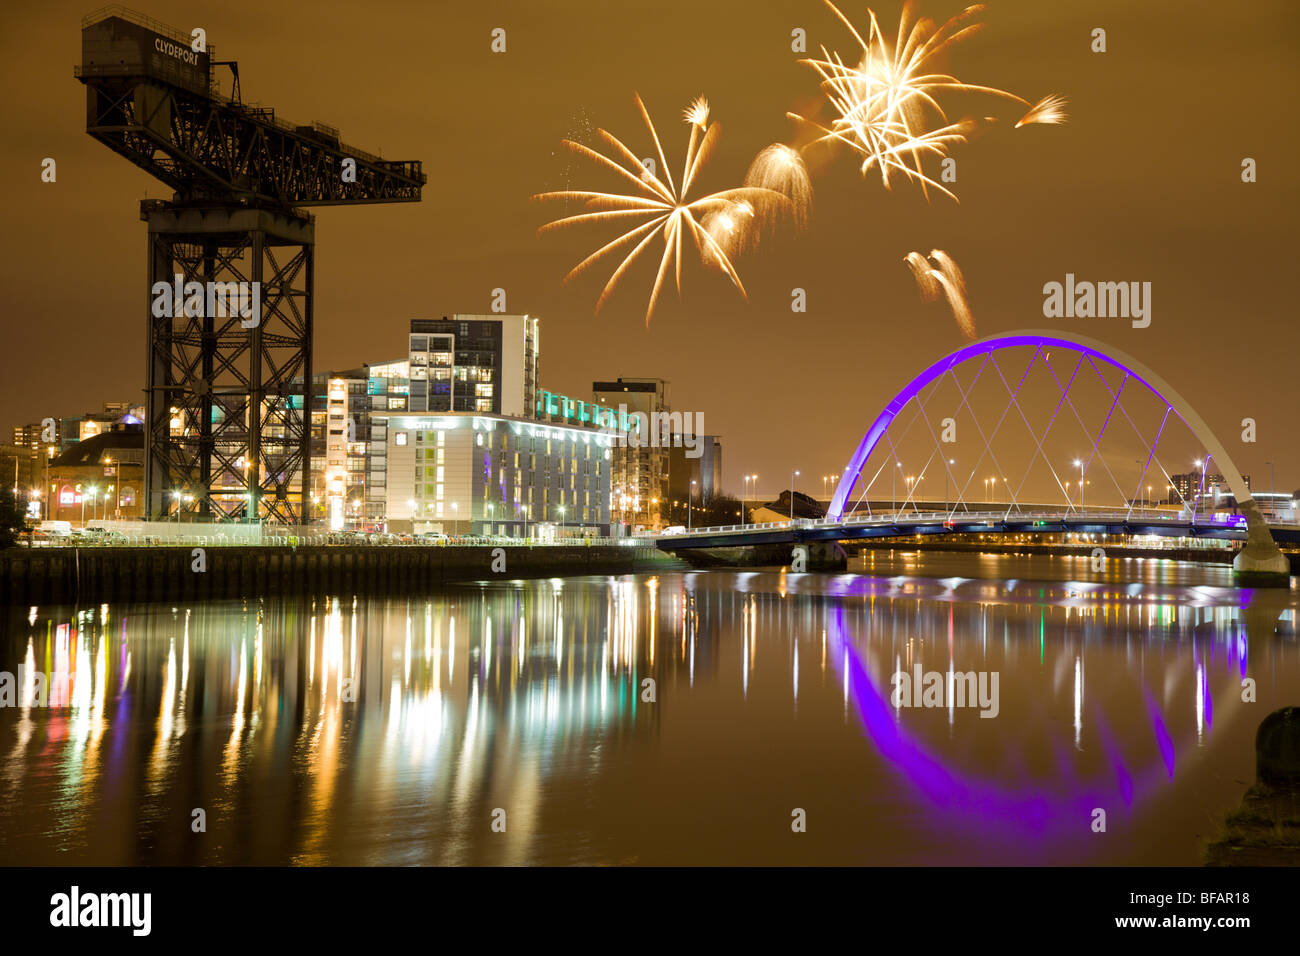 Night time image of the Clyde Arc (Squinty Bridge)  with Finnieston Crane with Fireworks in background Stock Photo